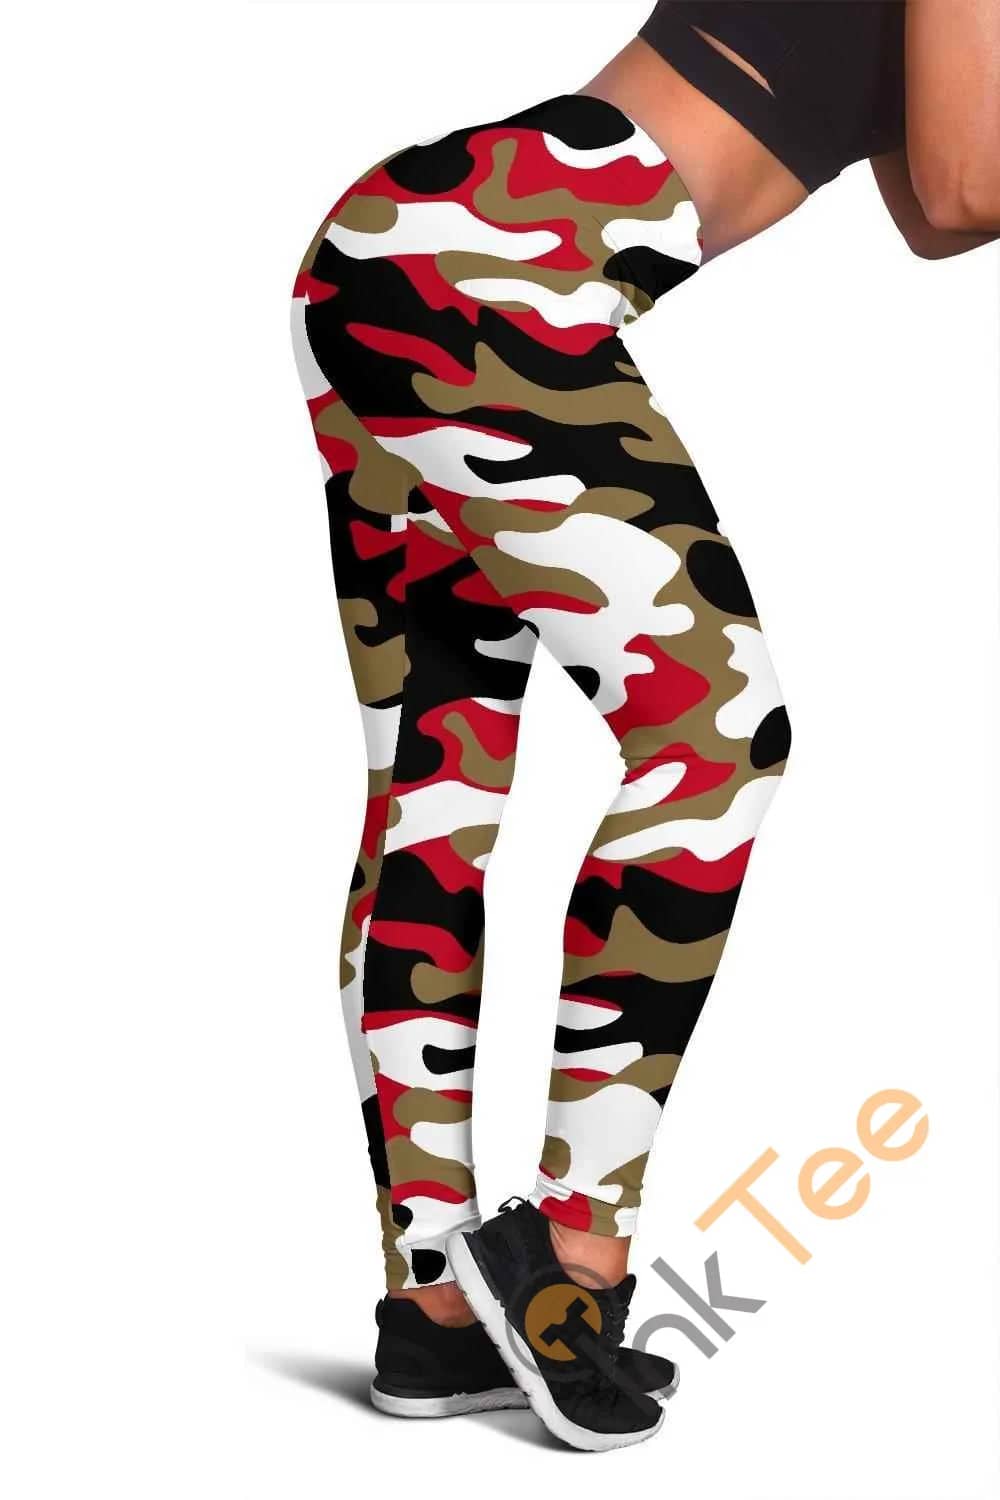 San Francisco Forty Niners Inspired Tru Camo 3D All Over Print For Yoga Fitness Fashion Women'S Leggings